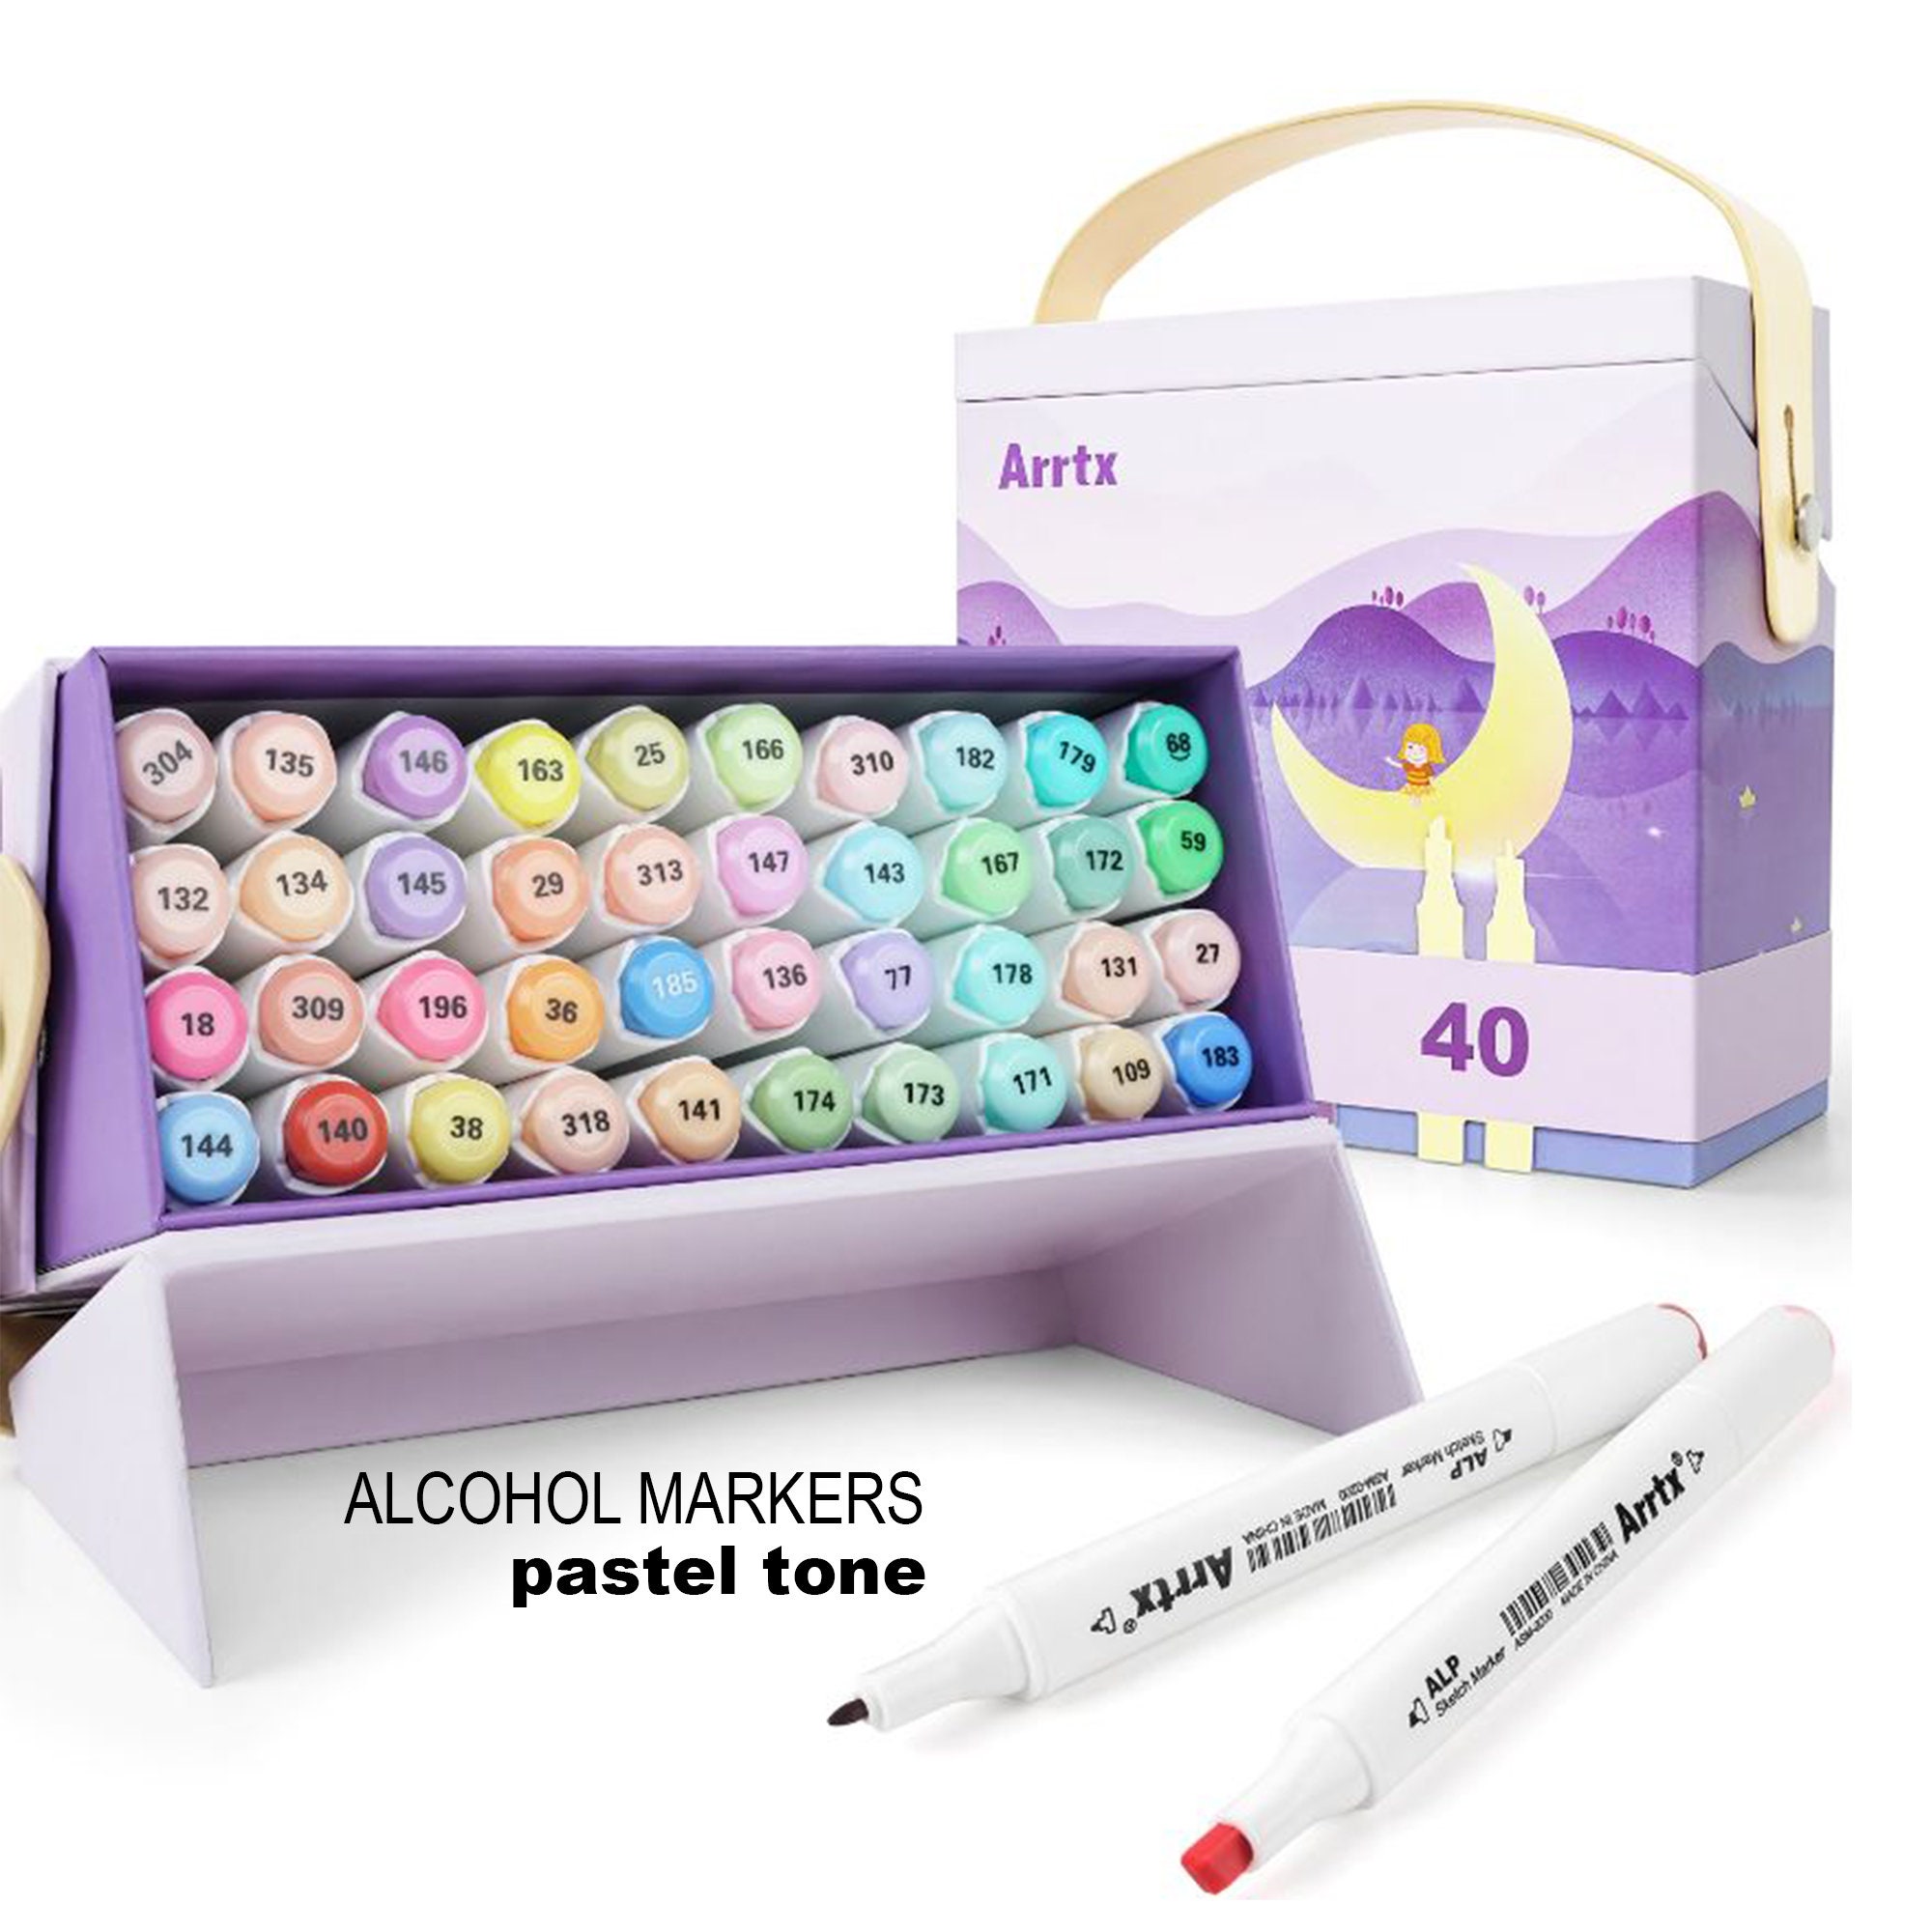 Alcohol Markers Pastel Tone Arrtx 40 Pastel Colors Marker Set Stable and  Durable Ink Permanent for Anime Illustration 